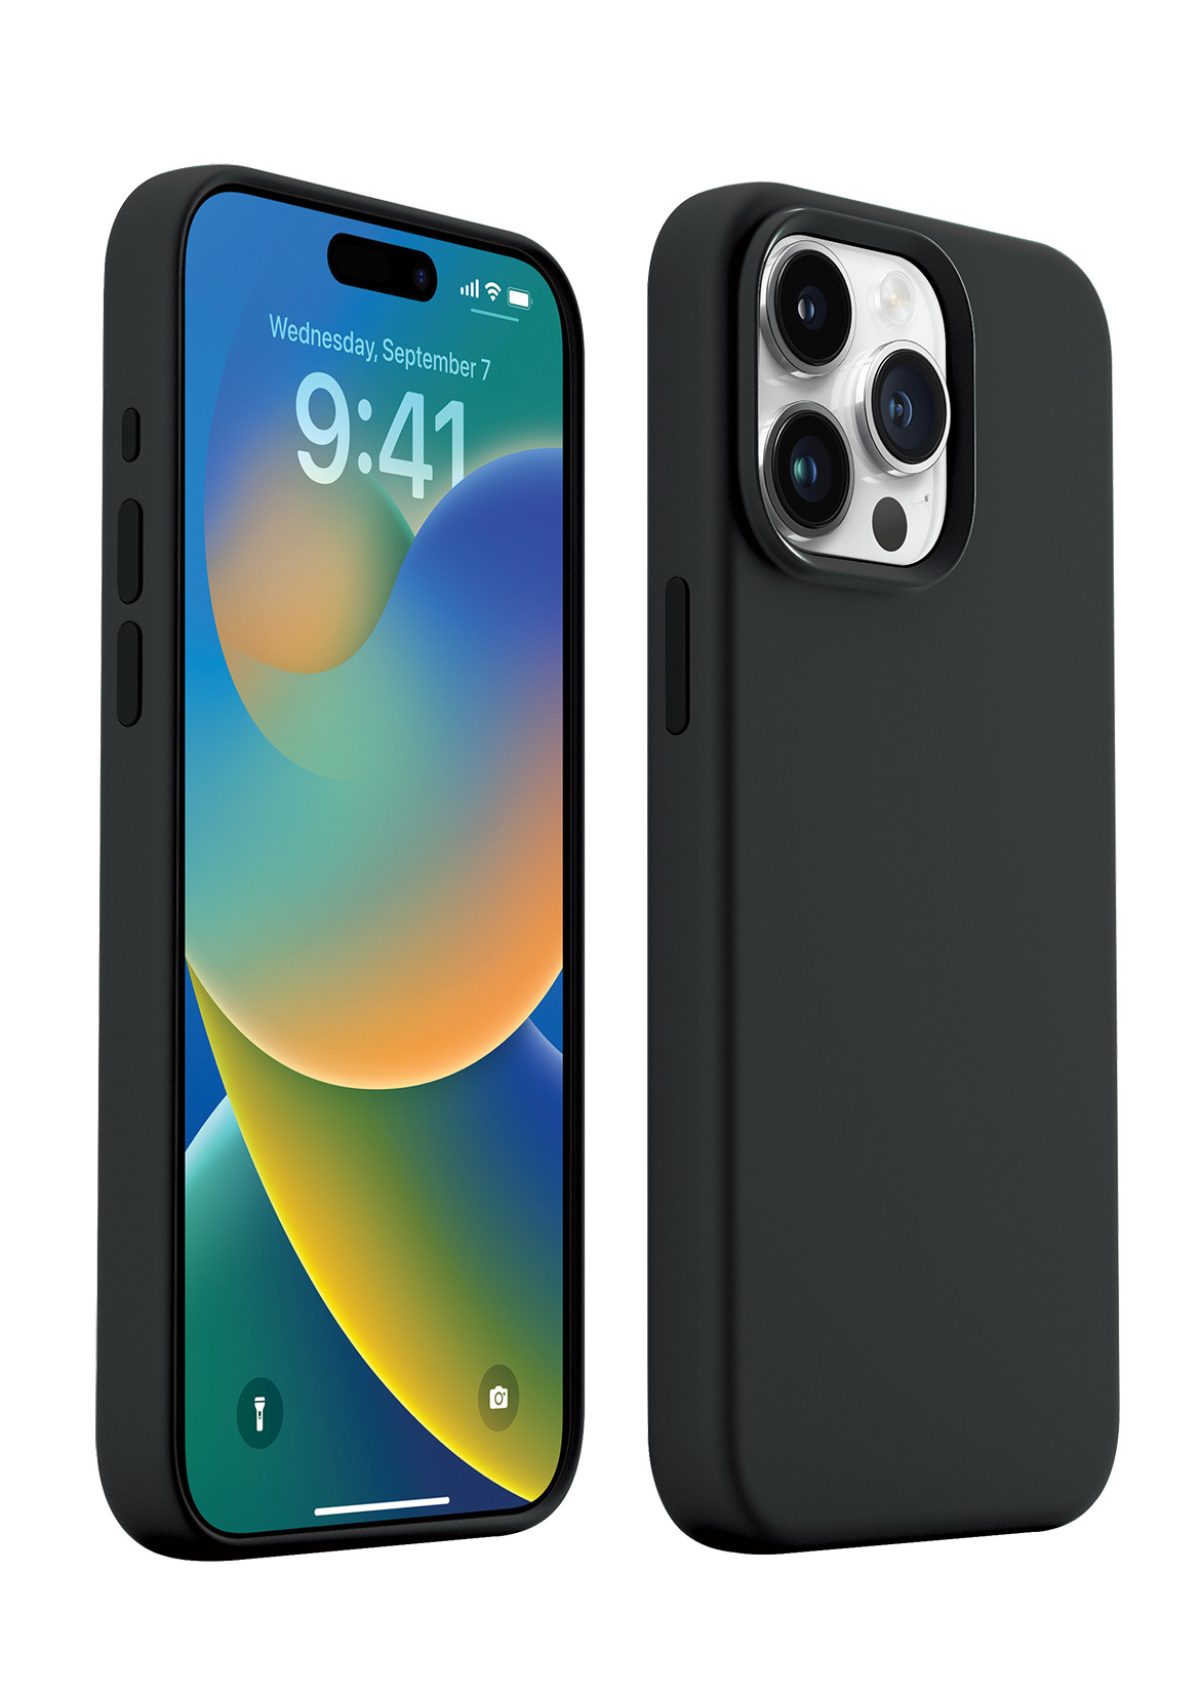  LAUT - Crystal Matter case Compatible with iPhone 15 Pro Max  (6.7) - Black : Cell Phones & Accessories